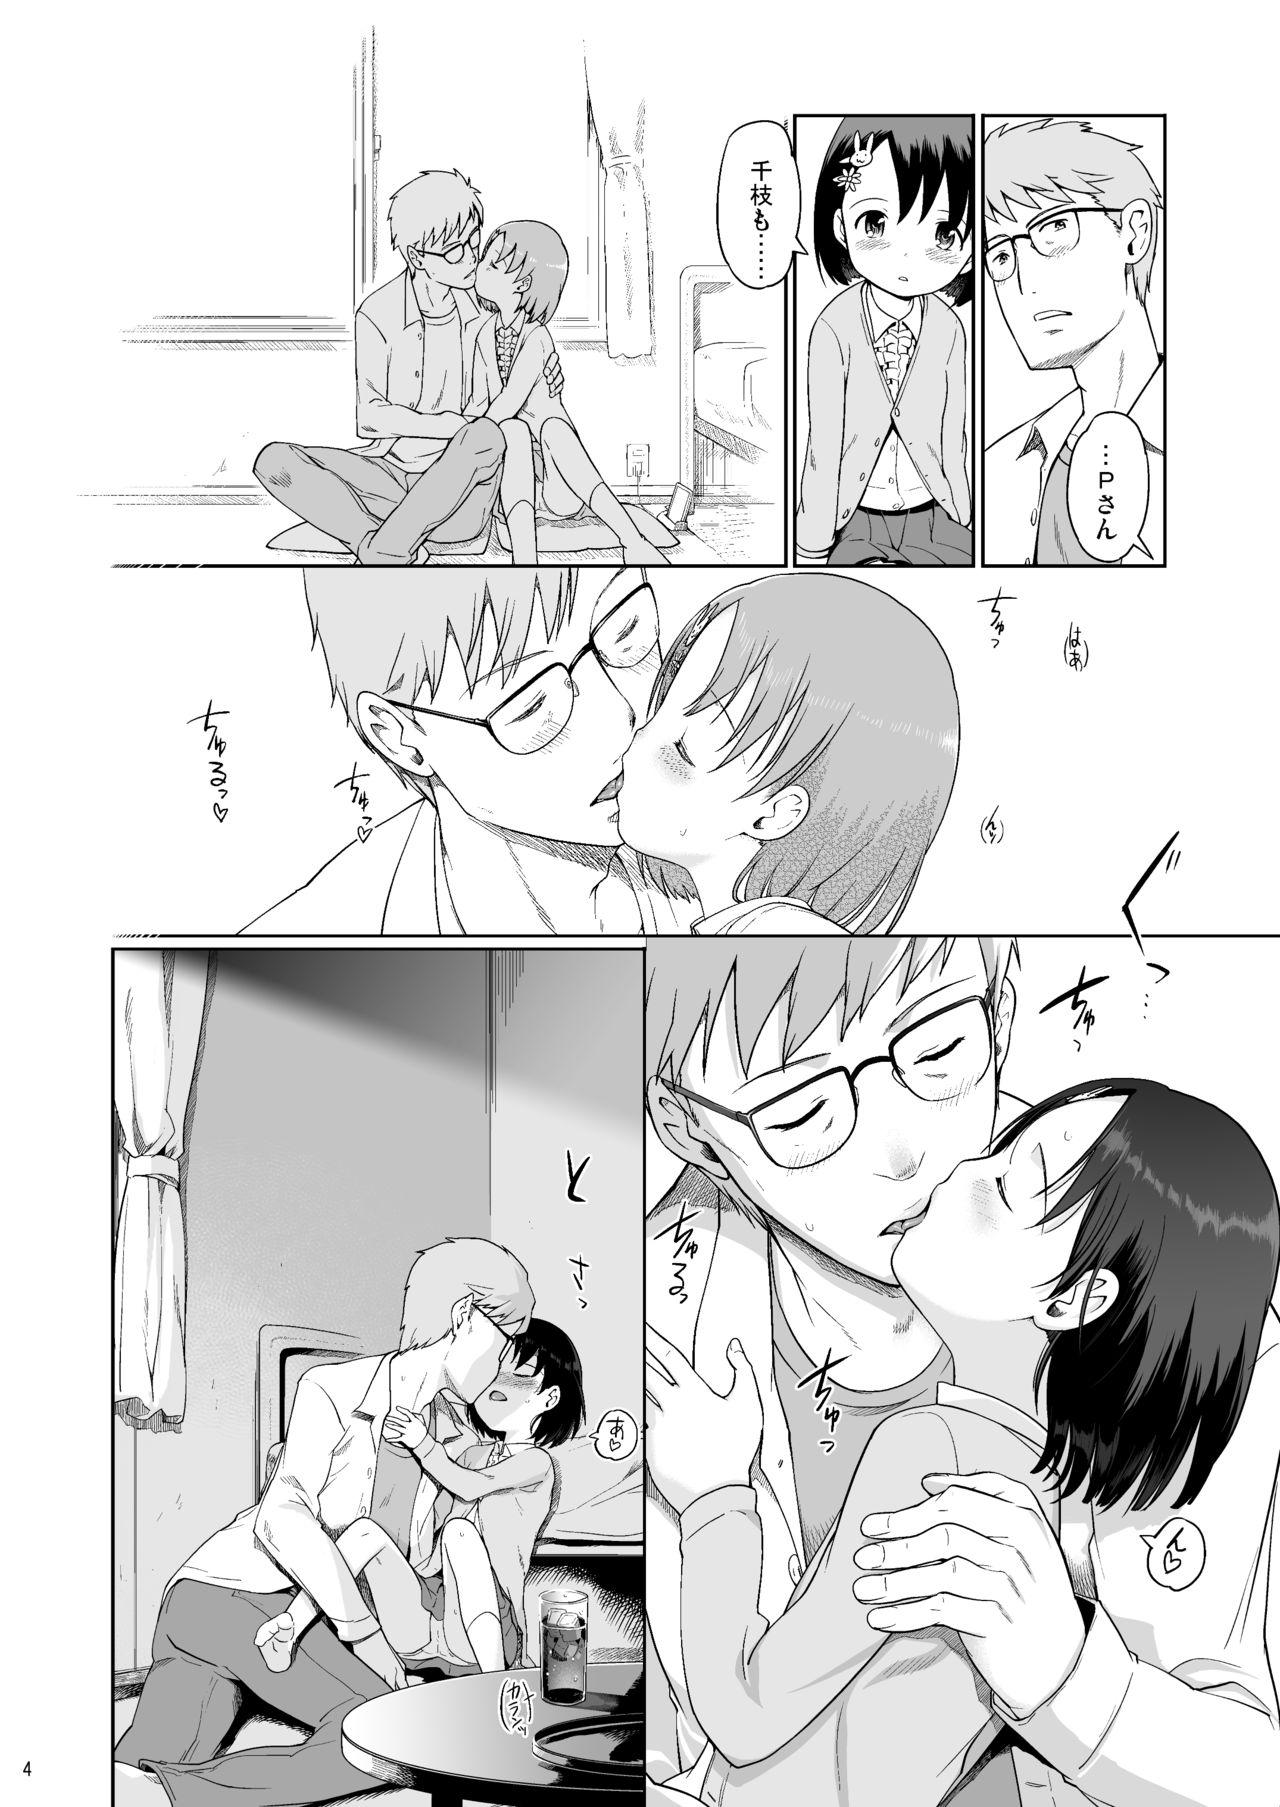 Ass Lick P-san to Issho! 2 - The idolmaster Ruiva - Page 5